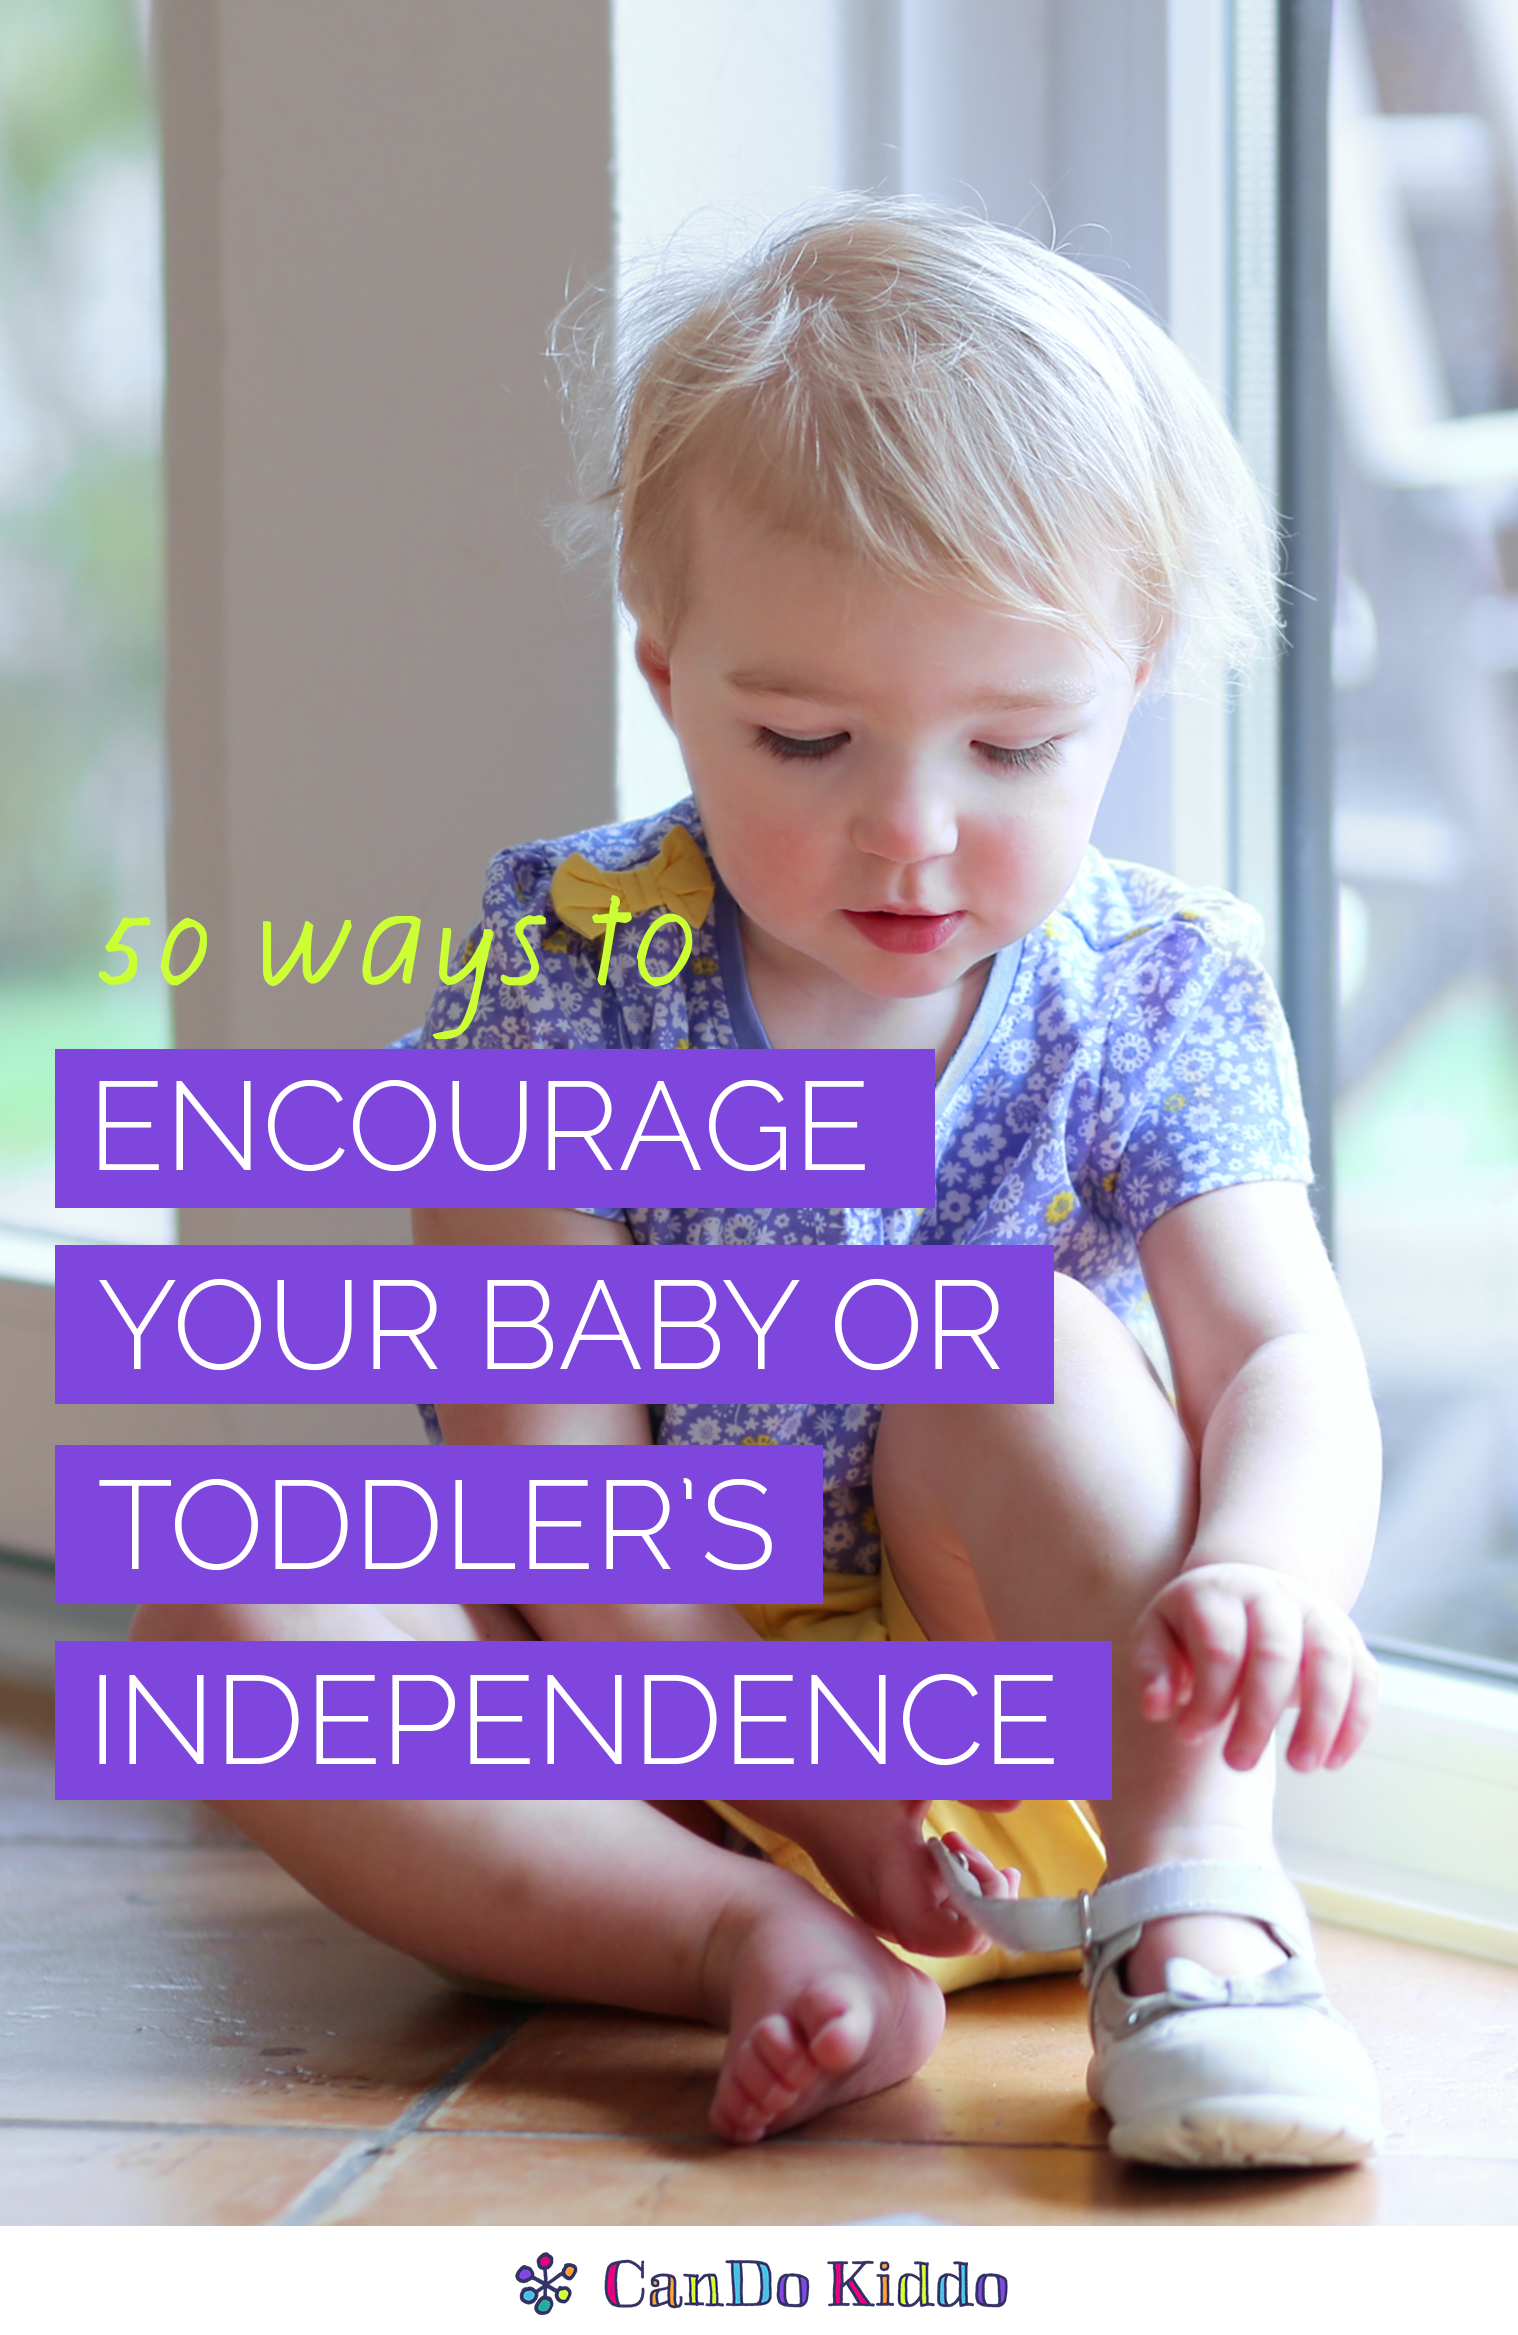 50 ways to promote baby and toddler independence | cando kiddo